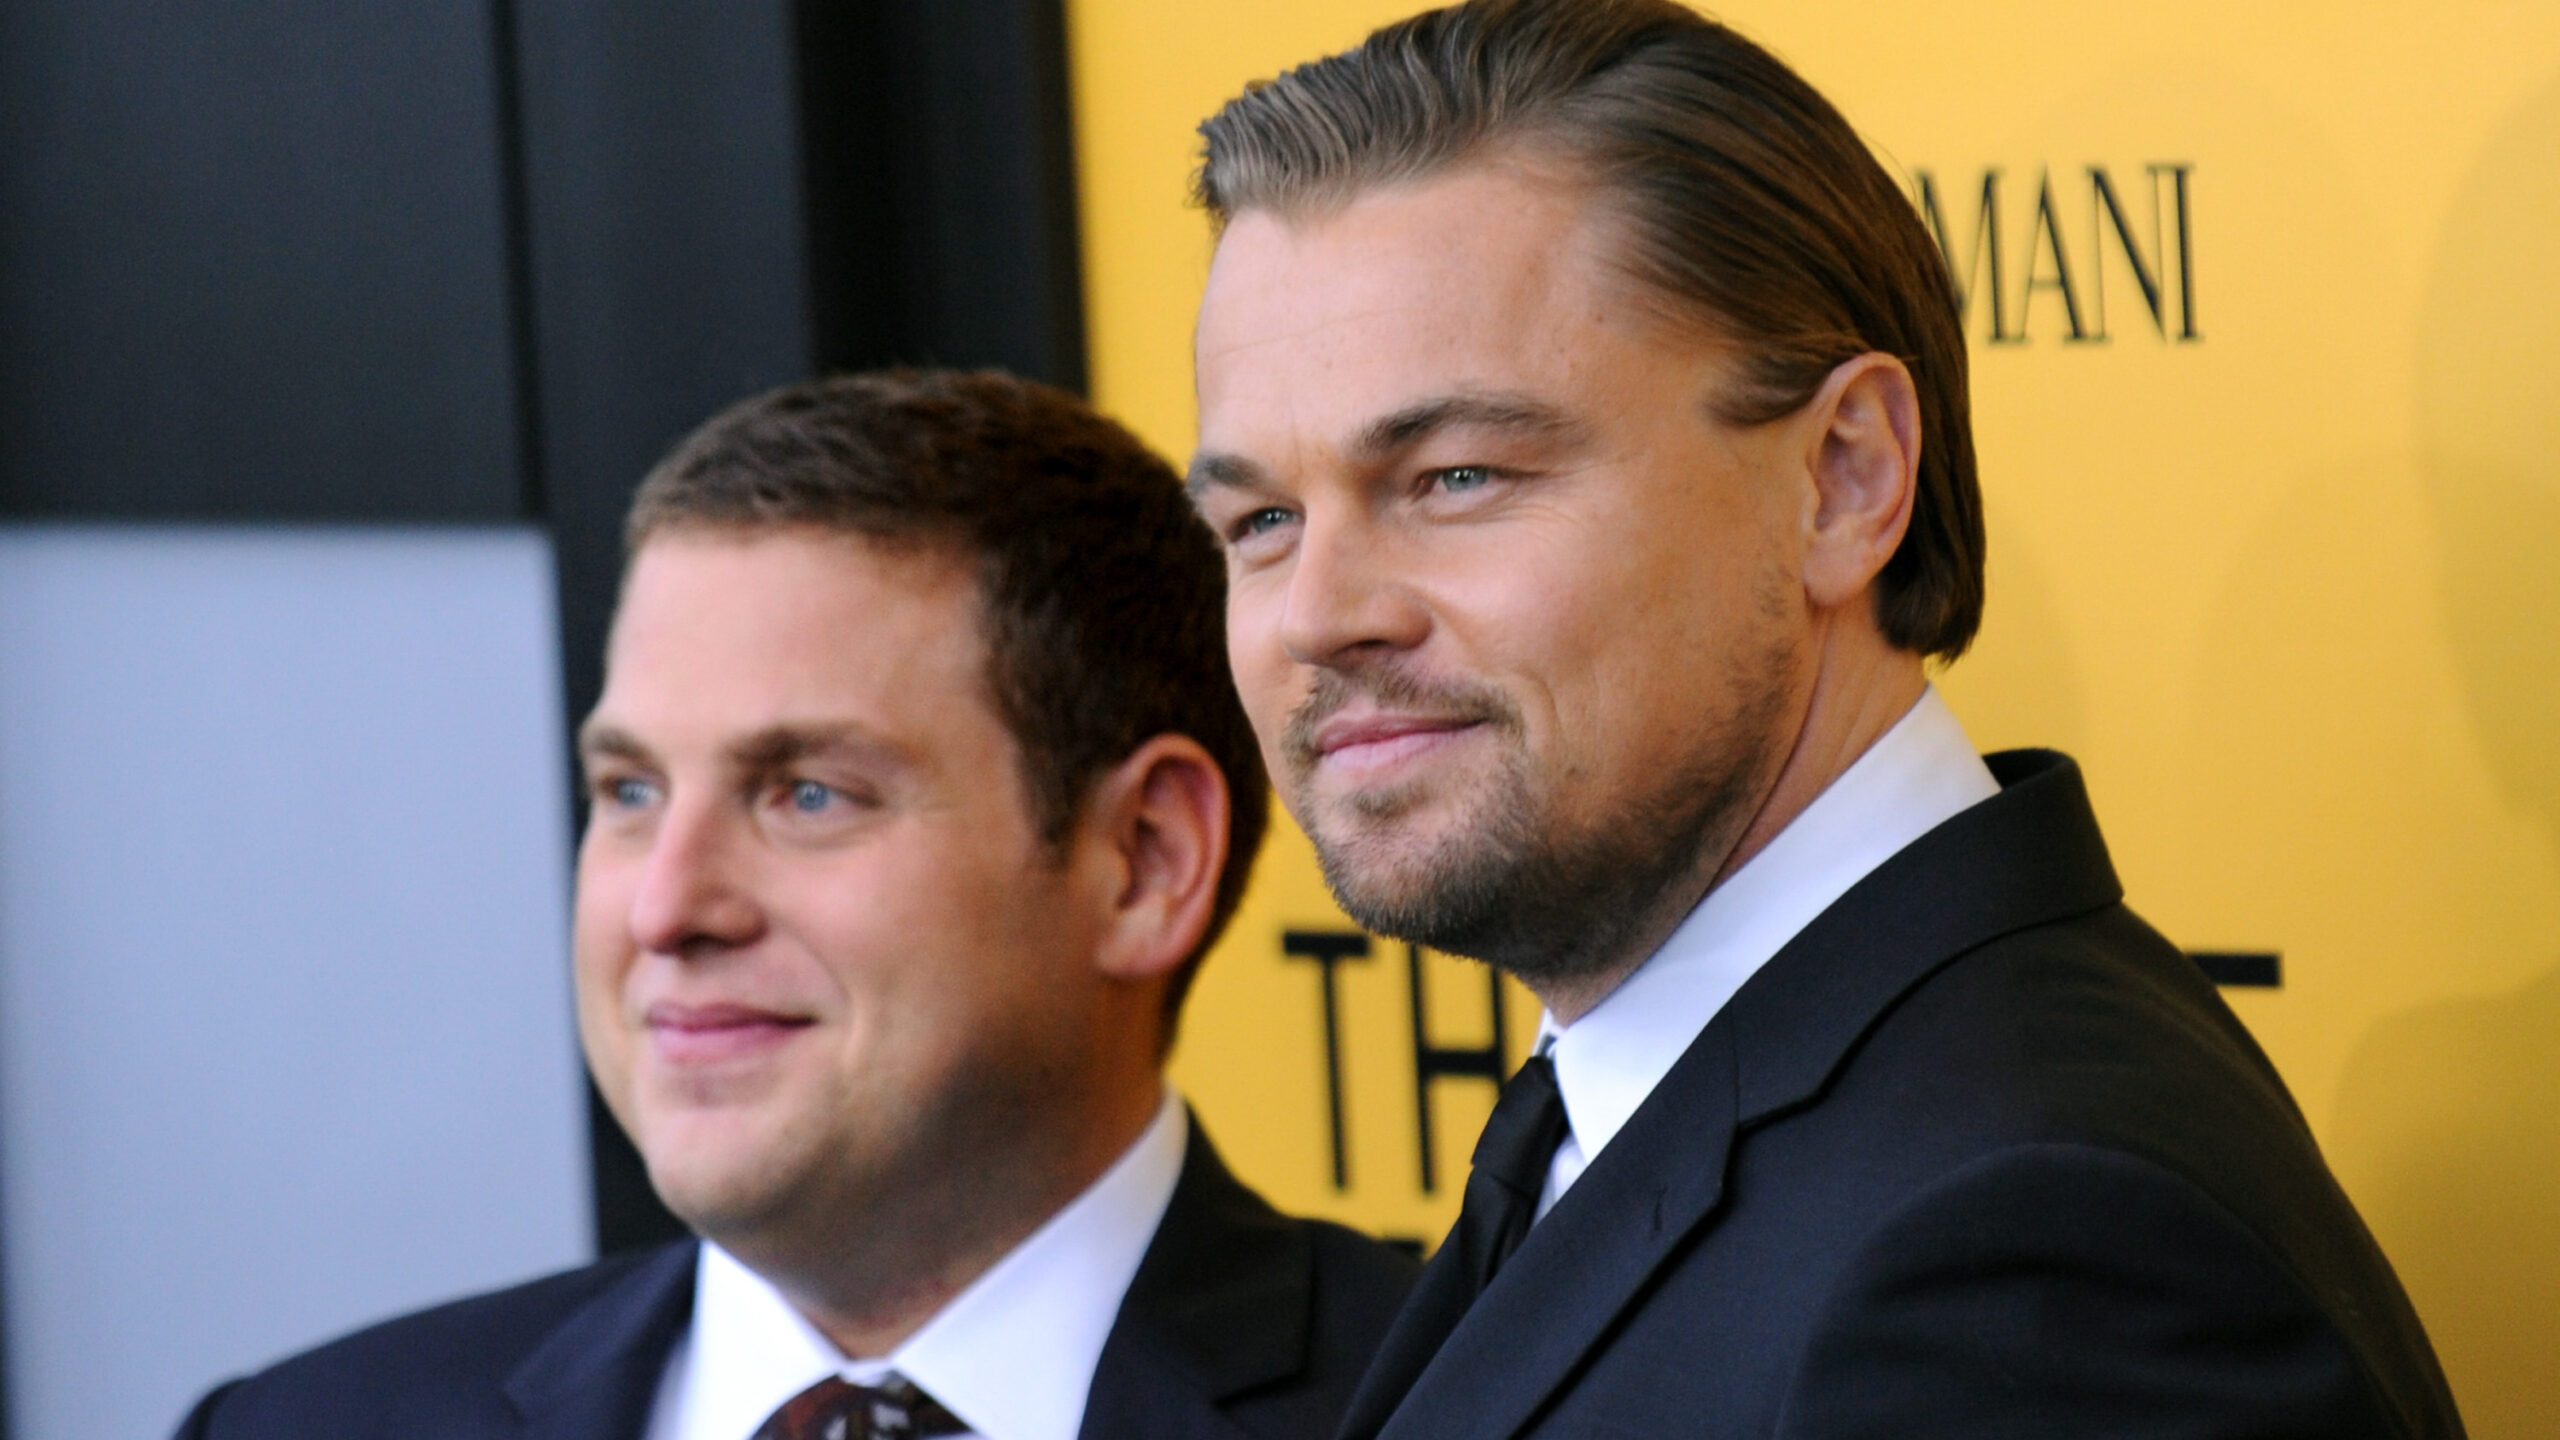 WATCH: Leonardo DiCaprio hilariously pranks Jonah Hill, pretends to be overenthusiastic fan